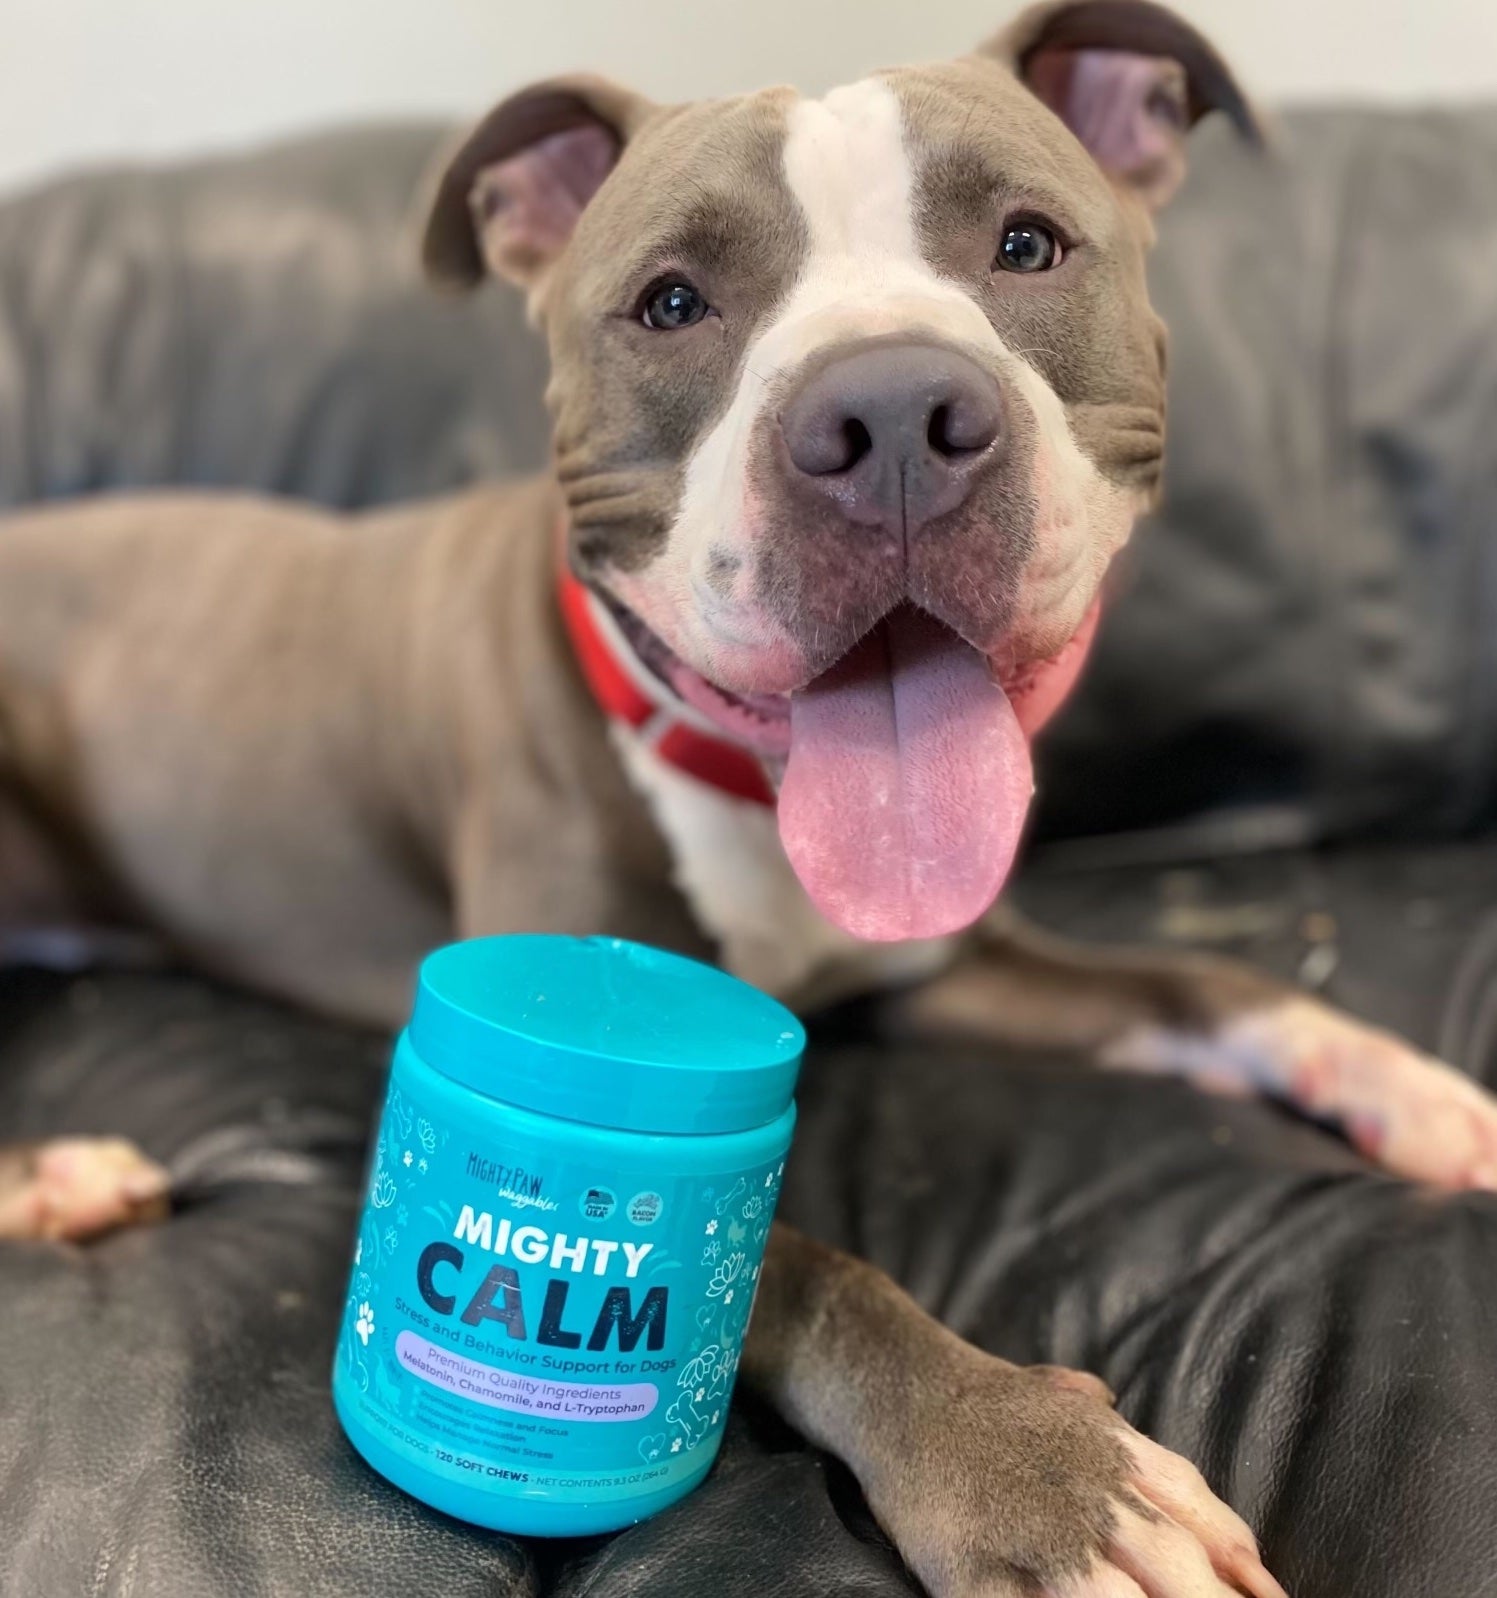 Grey and white pit bull type dog sitting with Mighty Calm dog supplements on black couch.